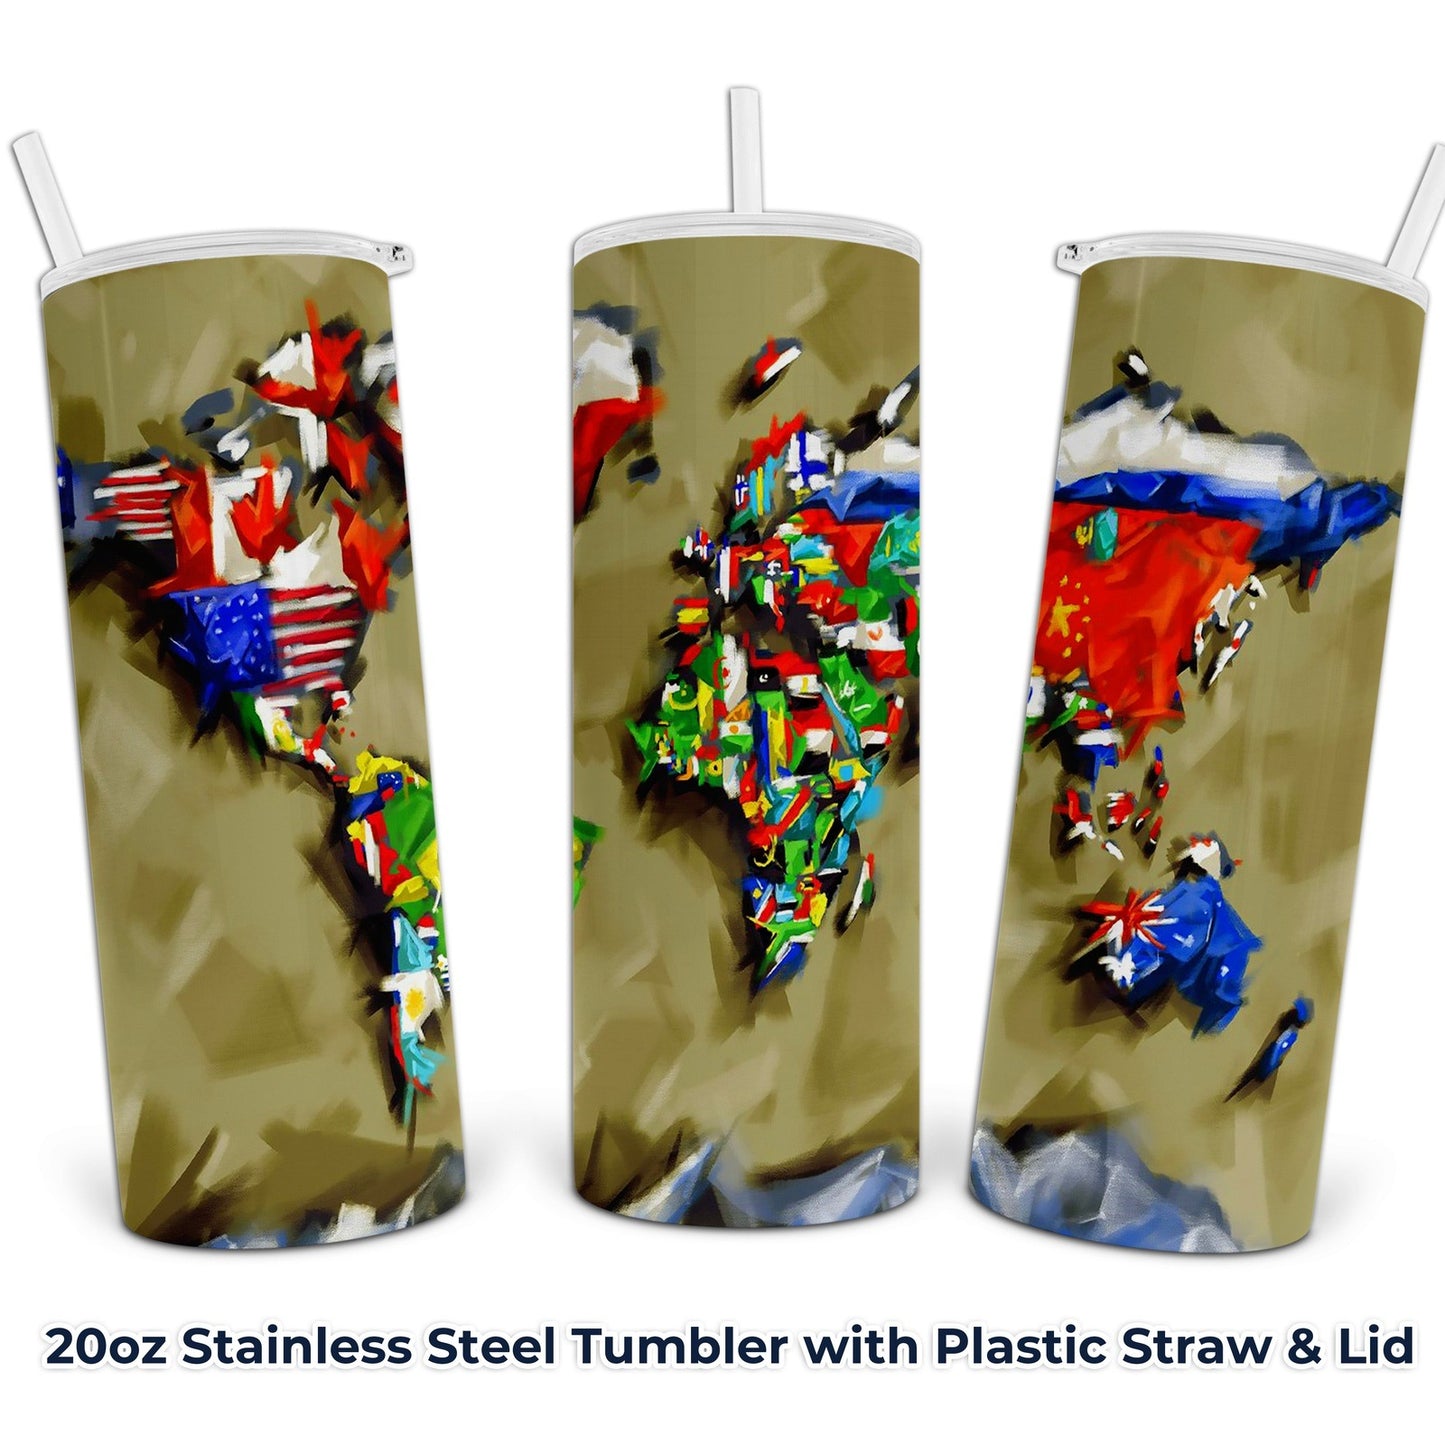 Artistic World Map Paint Brush Stroke - 20oz Stainless Steel Tumbler with Lid and Straw